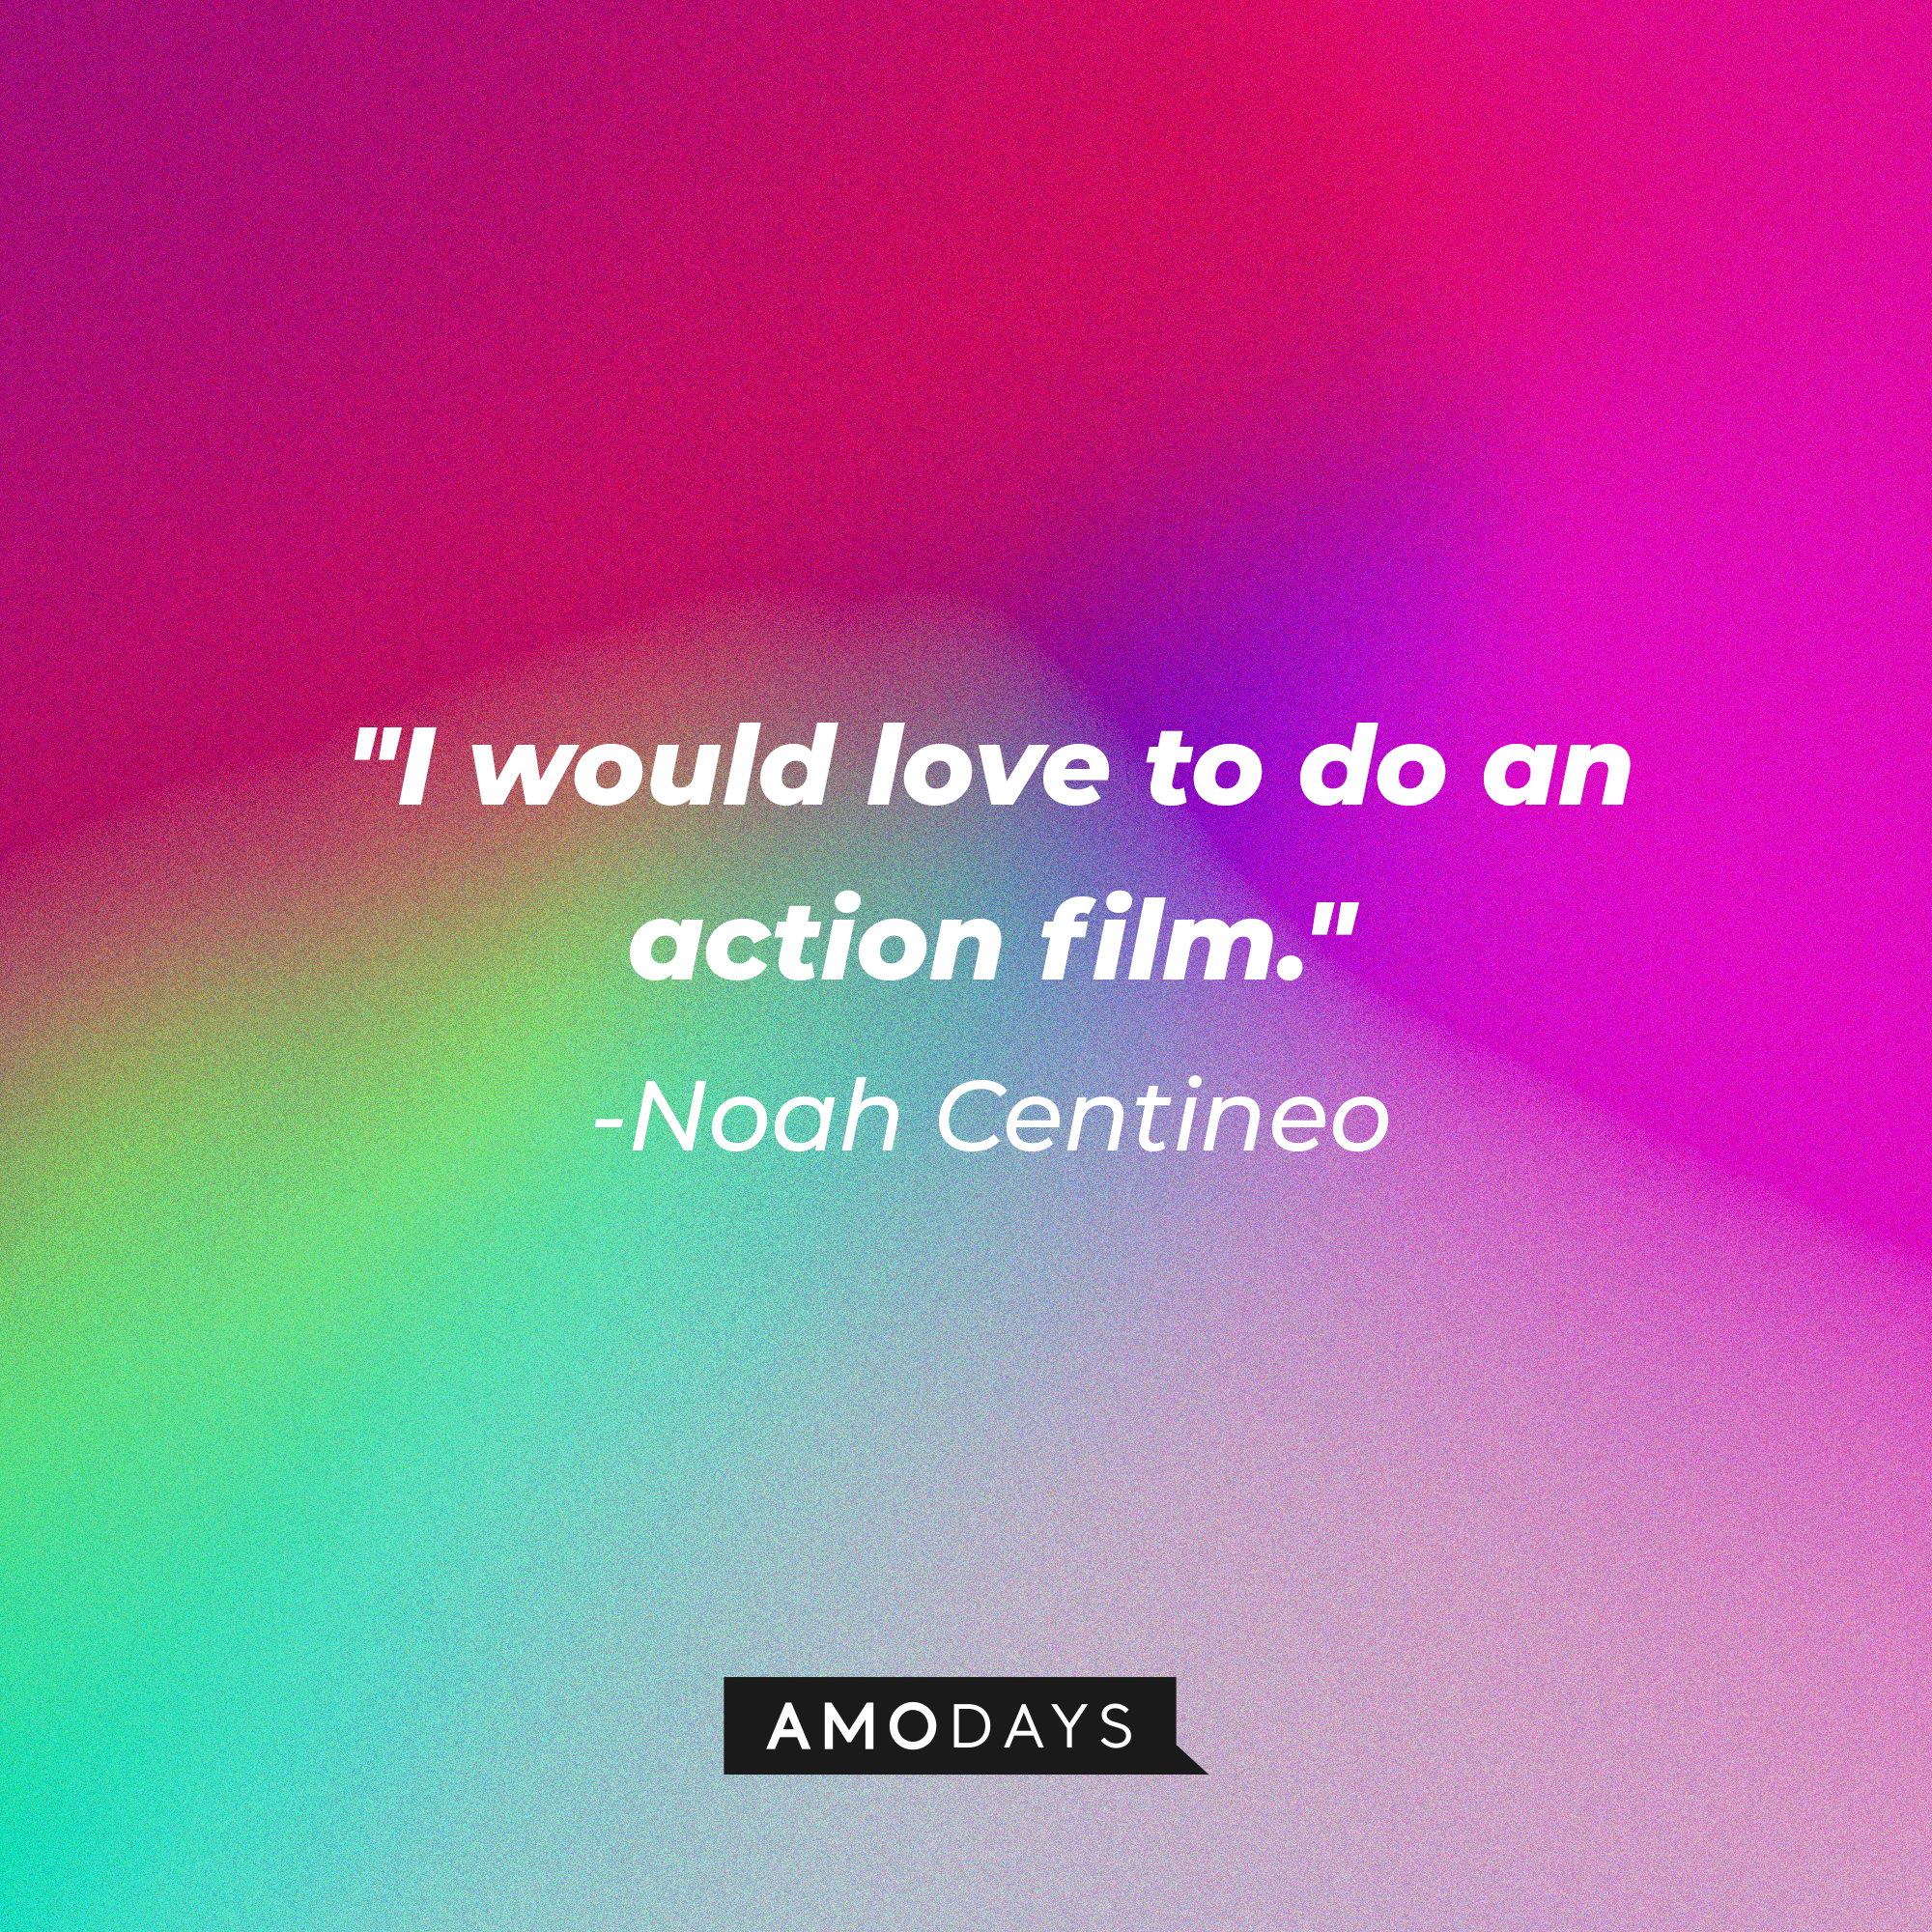 Noah Centineo's quote: "I would love to do an action film." | Image: AmoDays